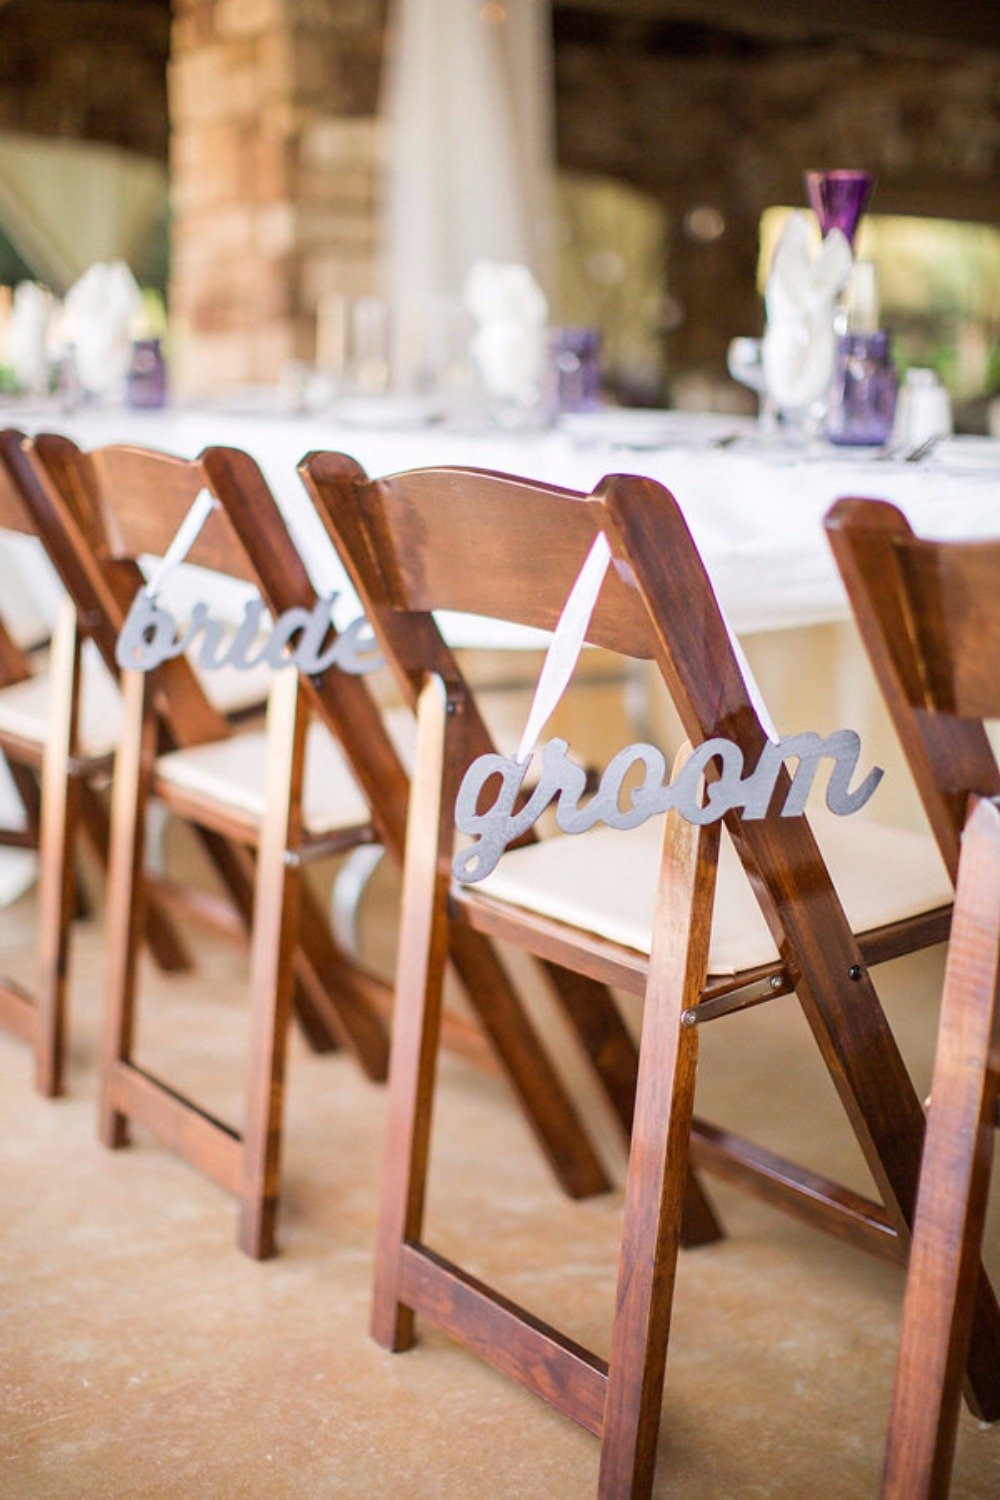 Bride and groom chair signs